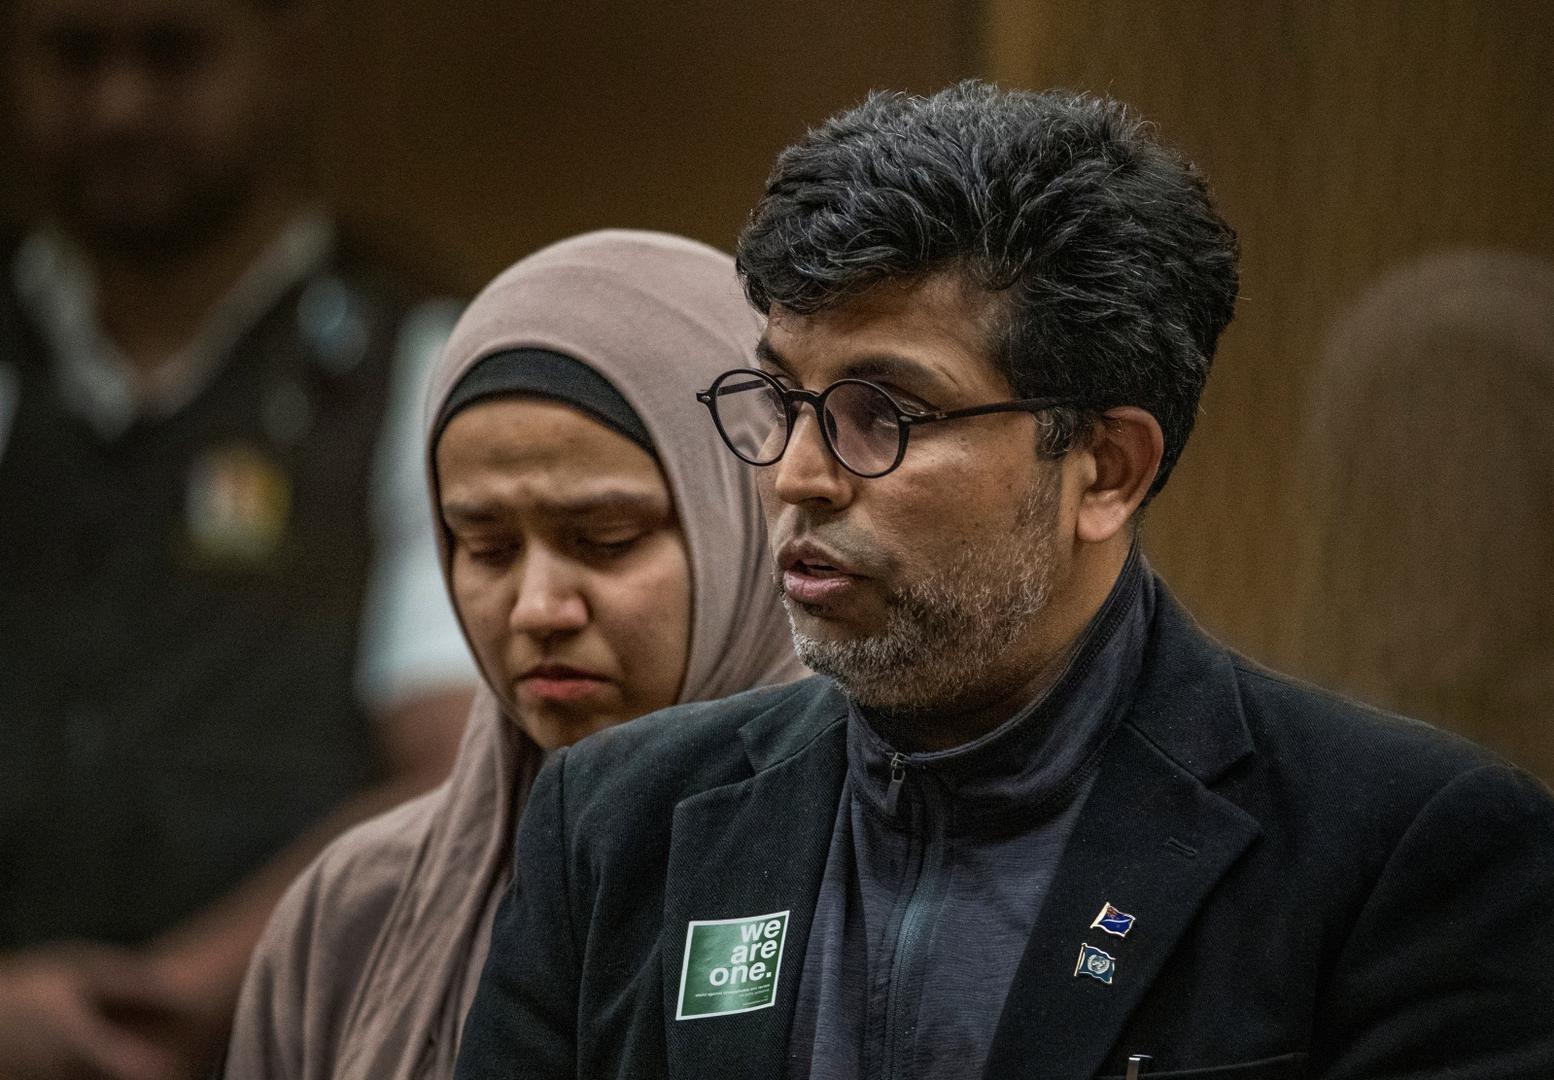 The sentencing for mosque gunman Brenton Tarrant takes place in Christchurch Mazharuddin Syed Ahmed gives a victim impact statement during the sentencing of mosque gunman Brenton Tarrant at the High Court in Christchurch, New Zealand, August 24, 2020. John Kirk-Anderson/Pool via REUTERS POOL